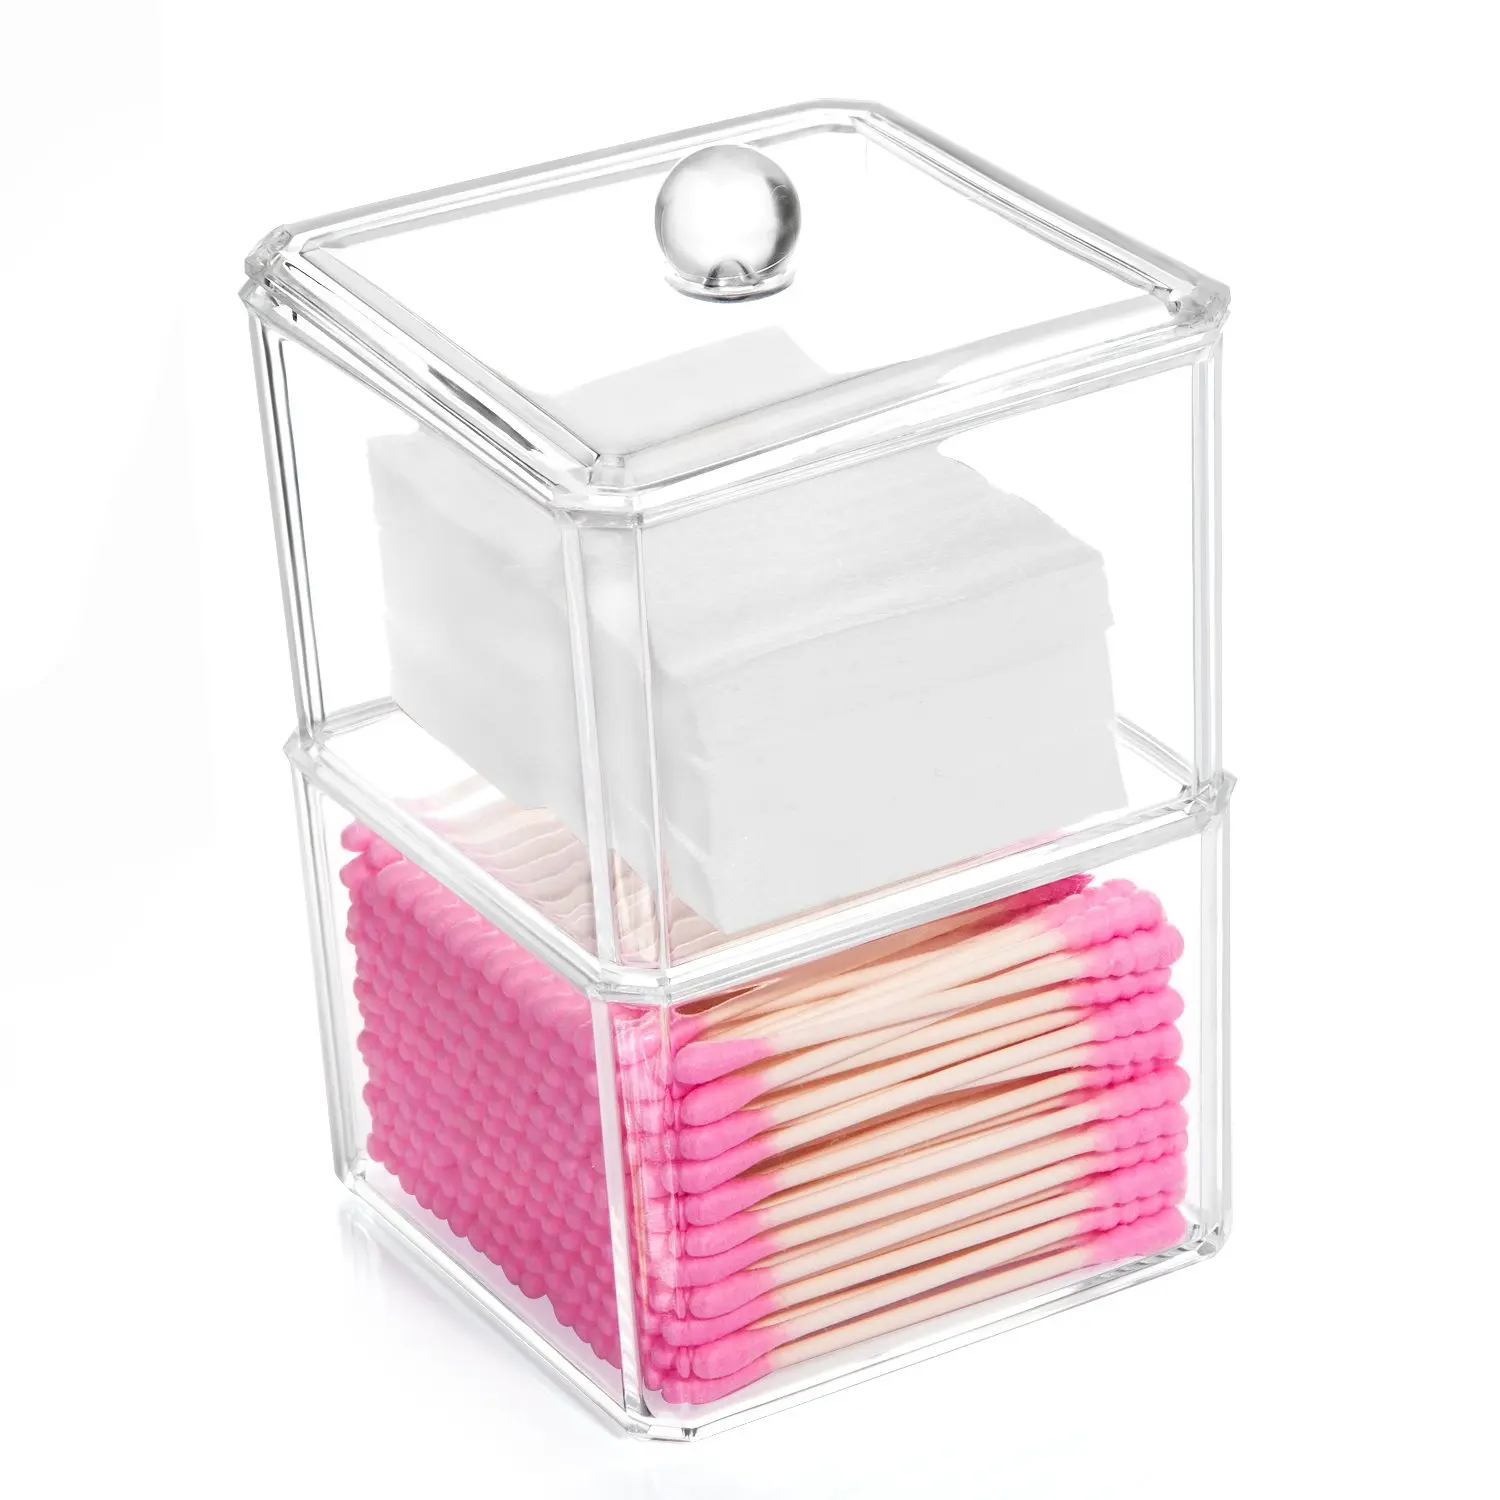 Buy Hblife Cotton Ball And Swab Holder Organizer Clear Acrylic Cotton Pad Container For Cotton Swabs Q Tips Make Up Pads Cosmetics And More In Cheap Price On Alibaba Com